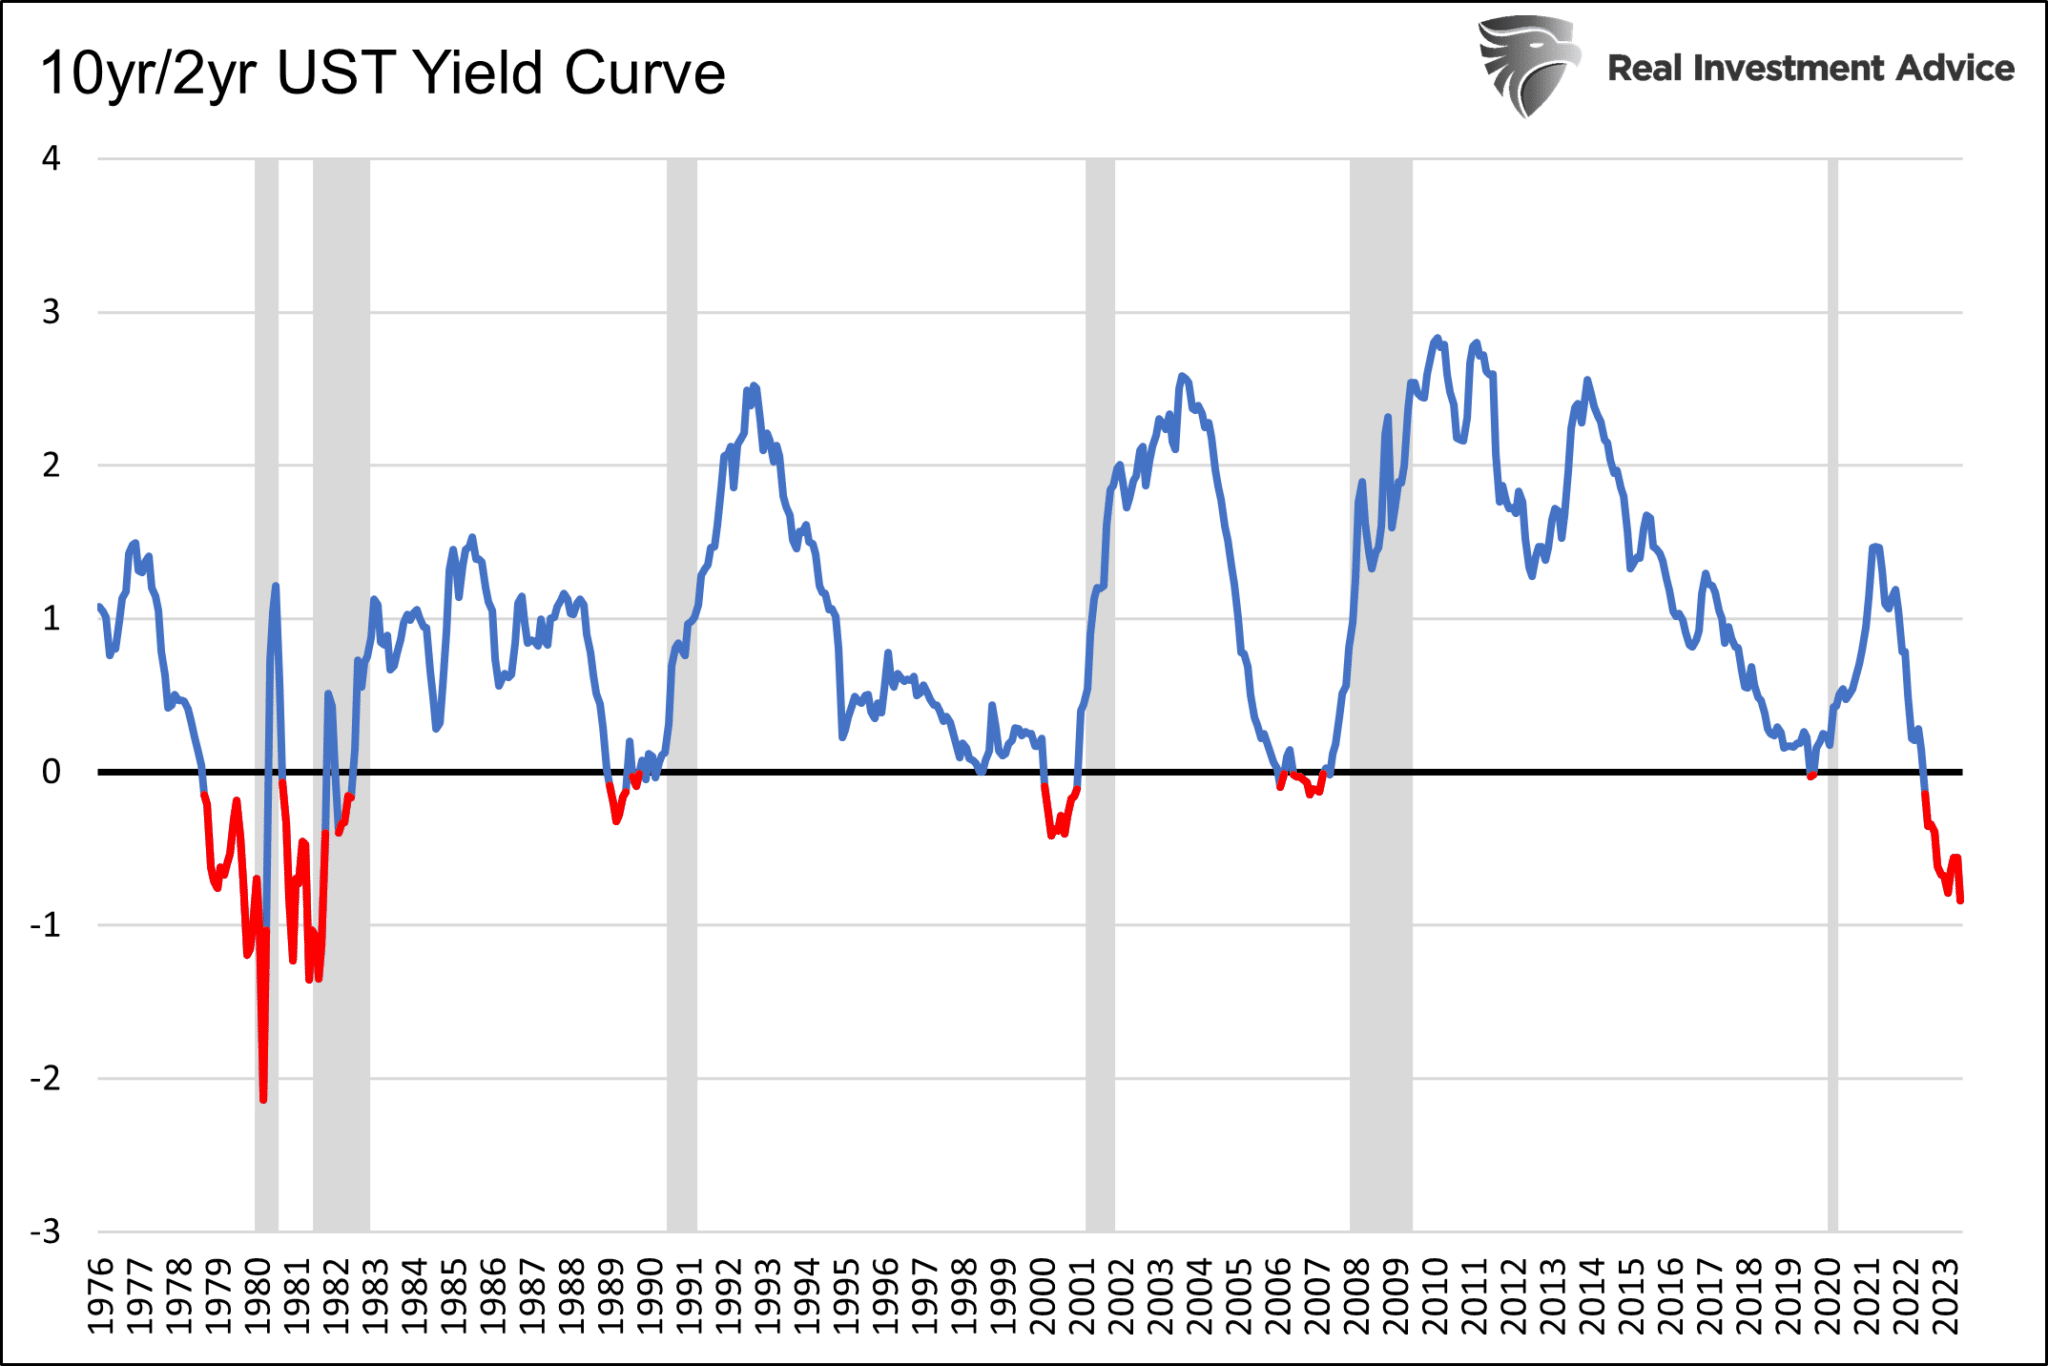 Is a steeper yield curve good news for banks?